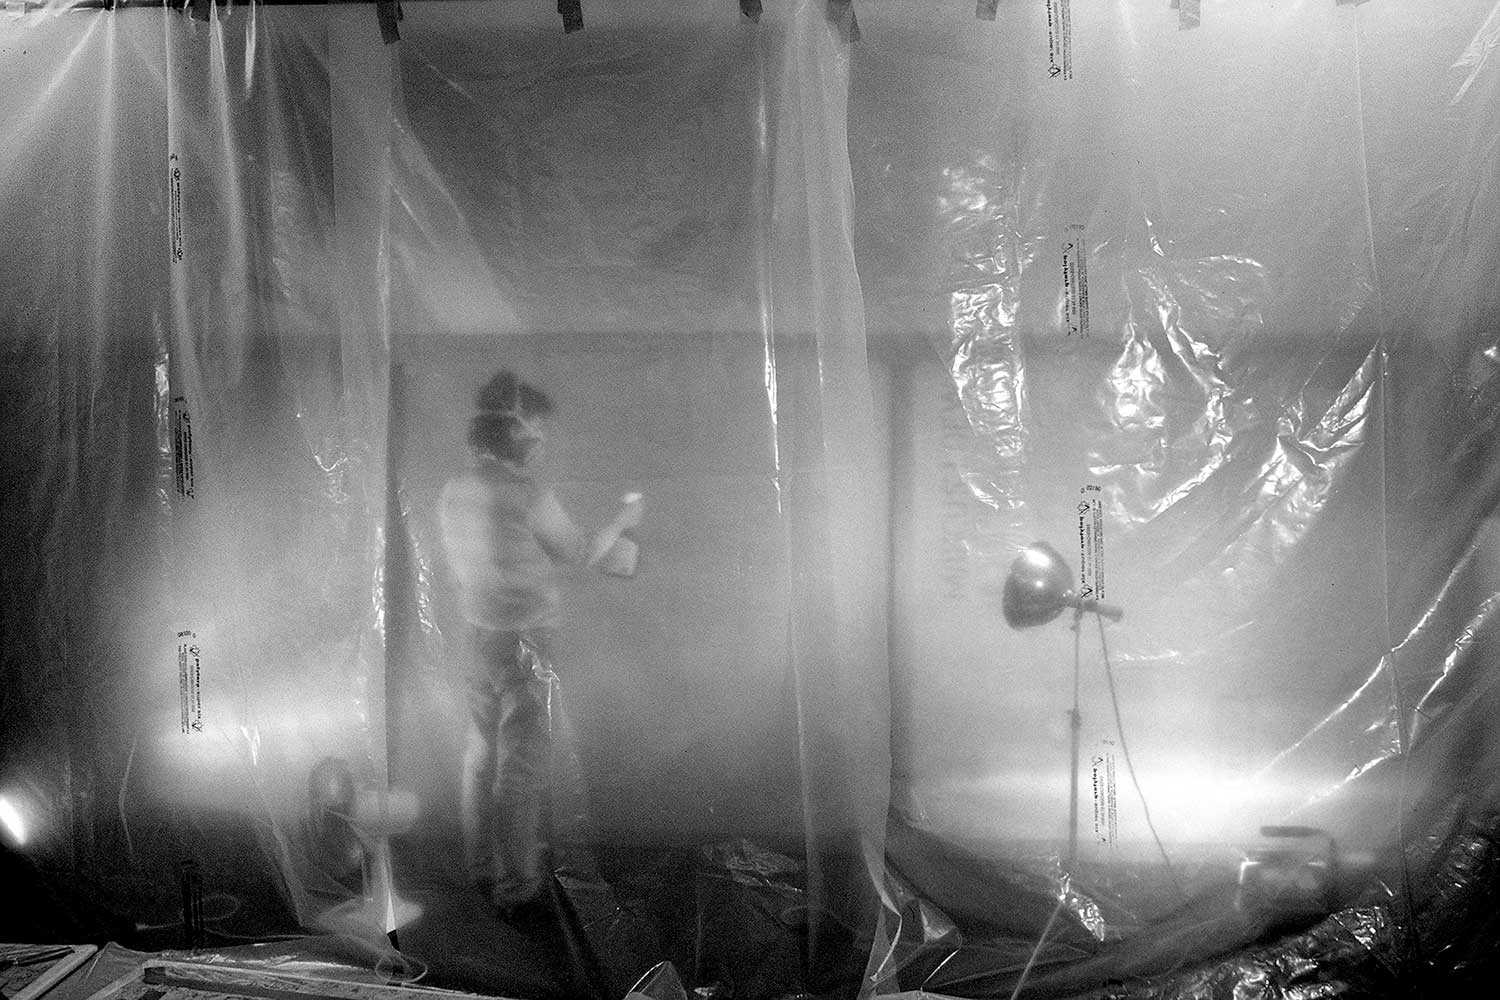 Head conservator, Janice Passafiume, in dehumidification chamber treating the cockling and rippling of the canvas